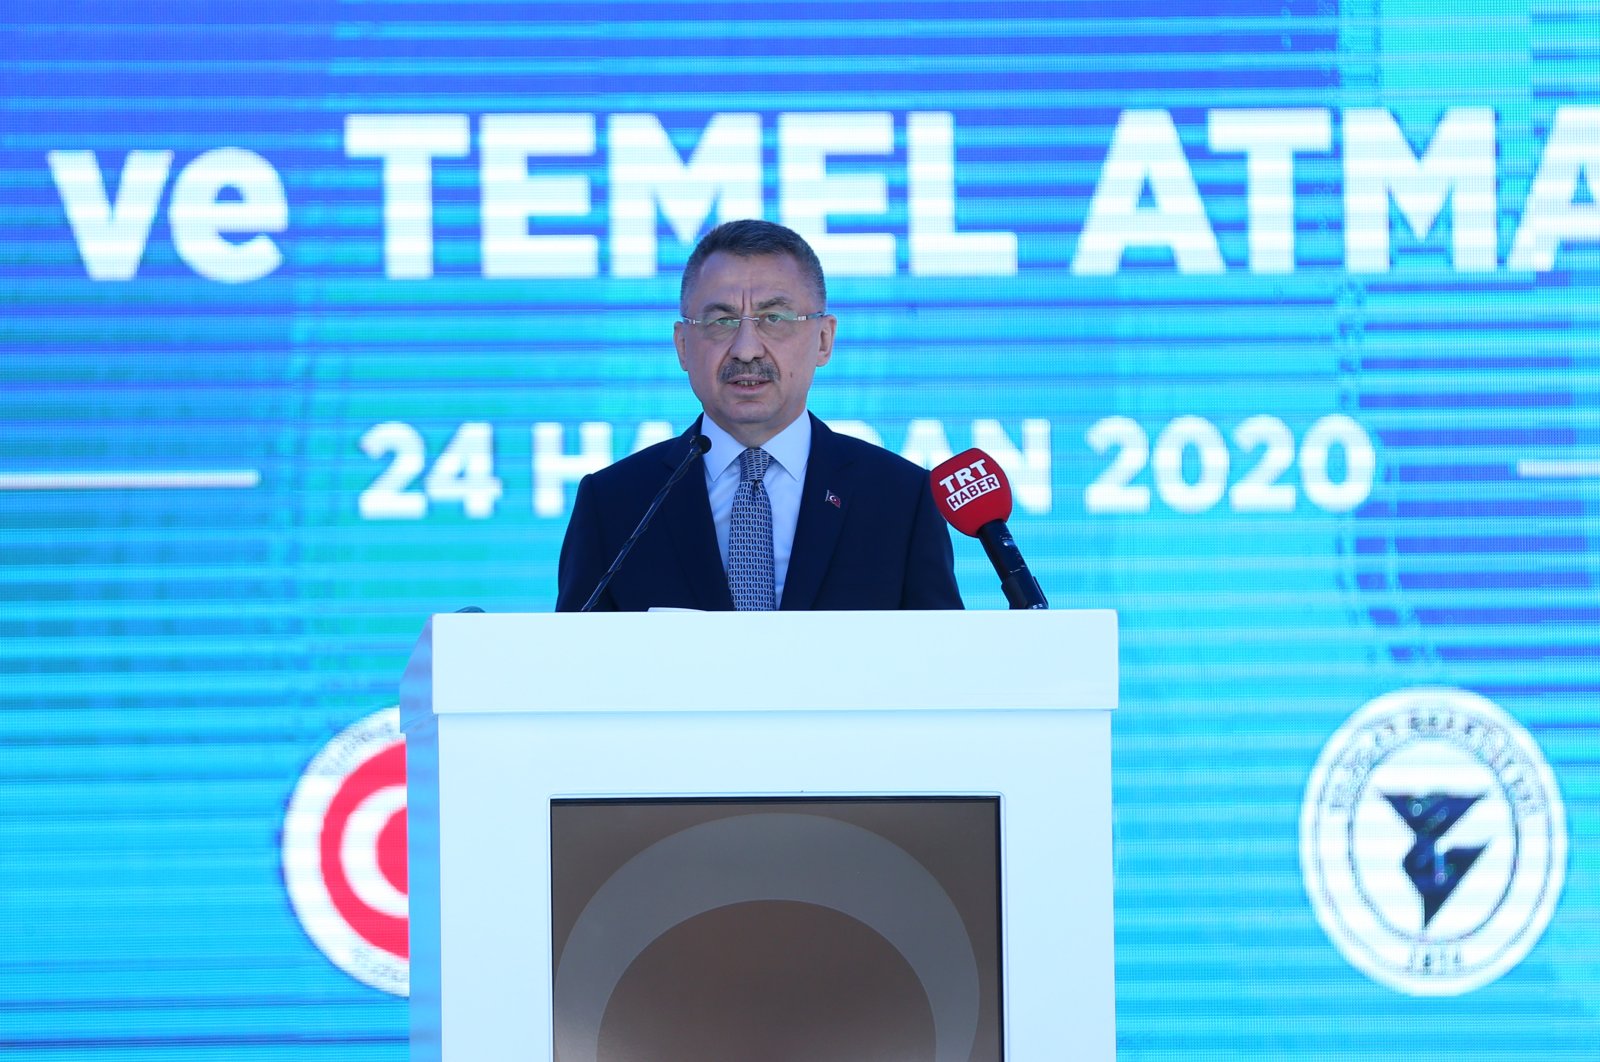 Vice President Fuat Oktay speaks during an inauguration ceremony in central Turkey's Yozgat, June 24, 2020. (AA Photo)